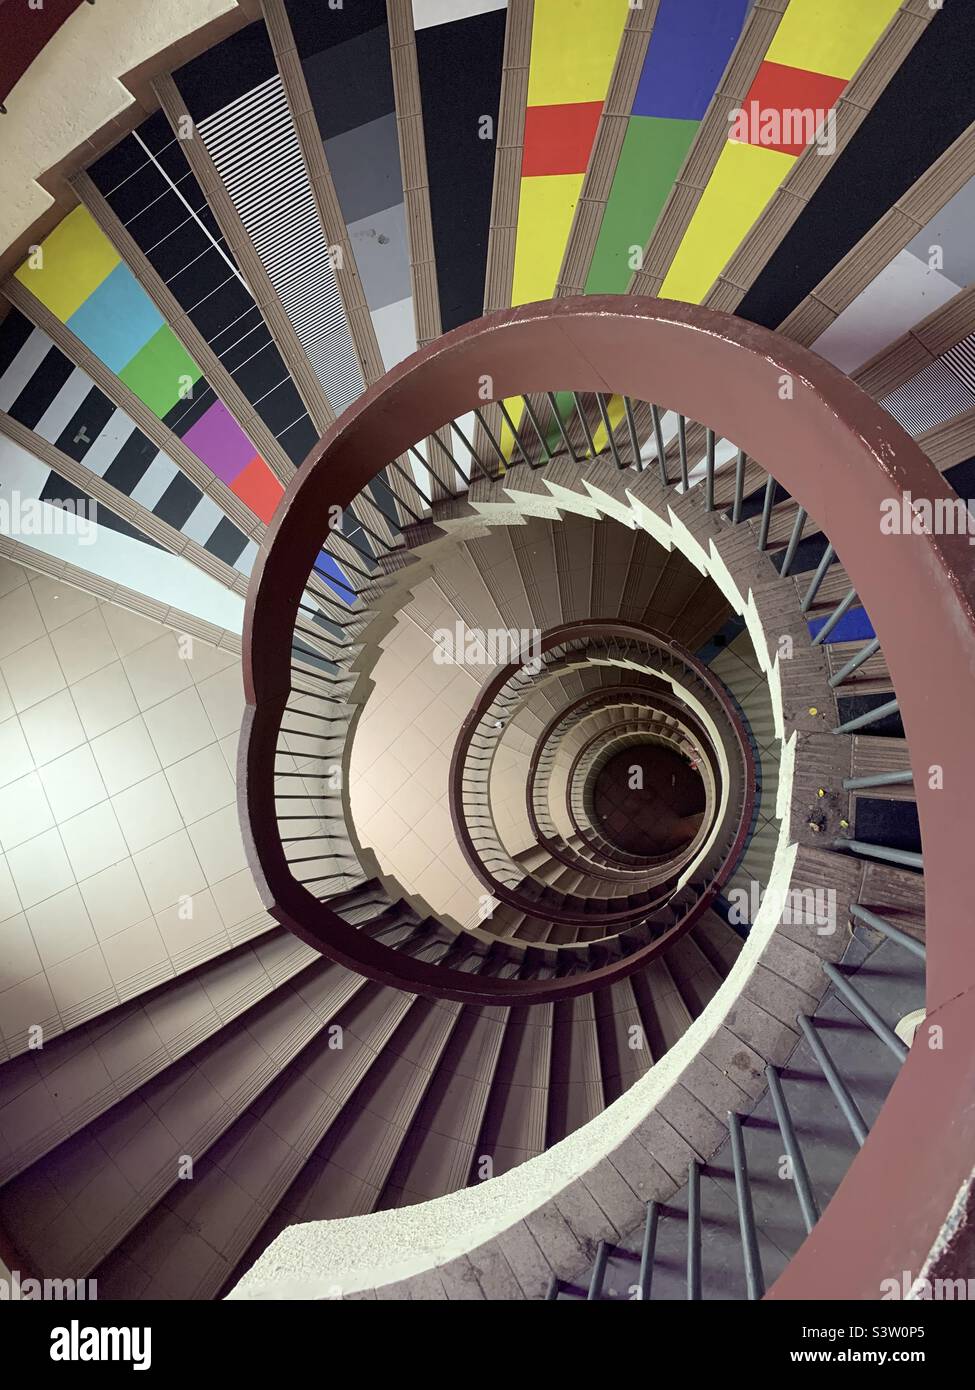 Spiral staircase with colorful steps like TV test pattern Stock Photo